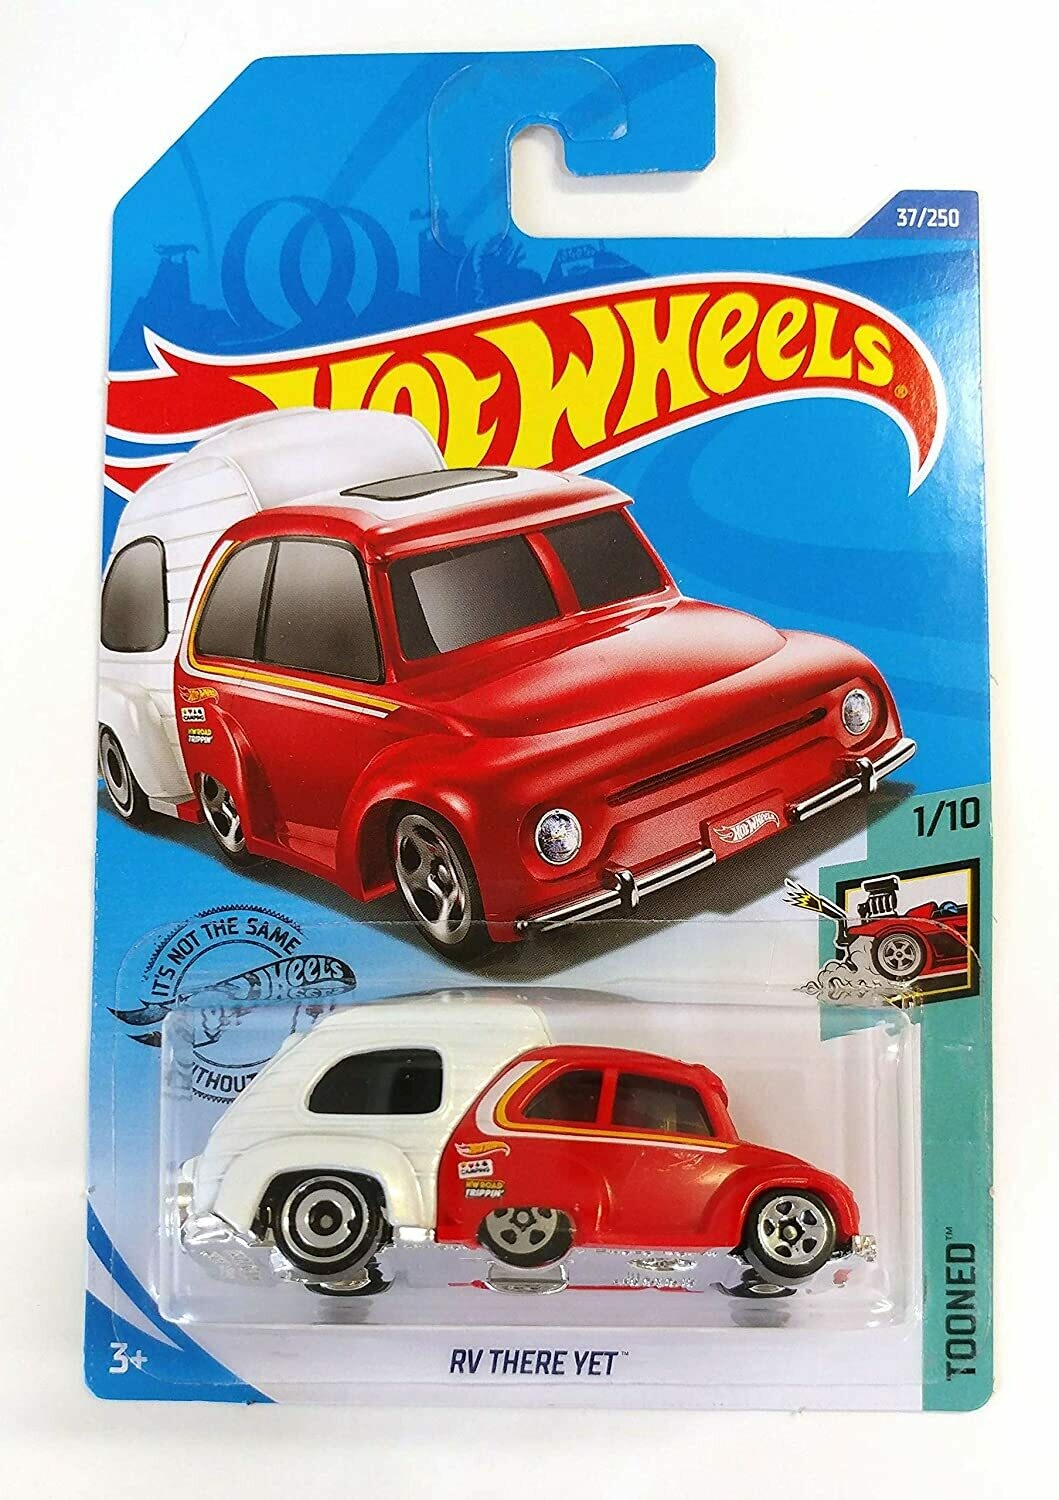 Hot Wheels 2019 RV There Yet Tooned Red & White 37/250, Long Card by Mattel